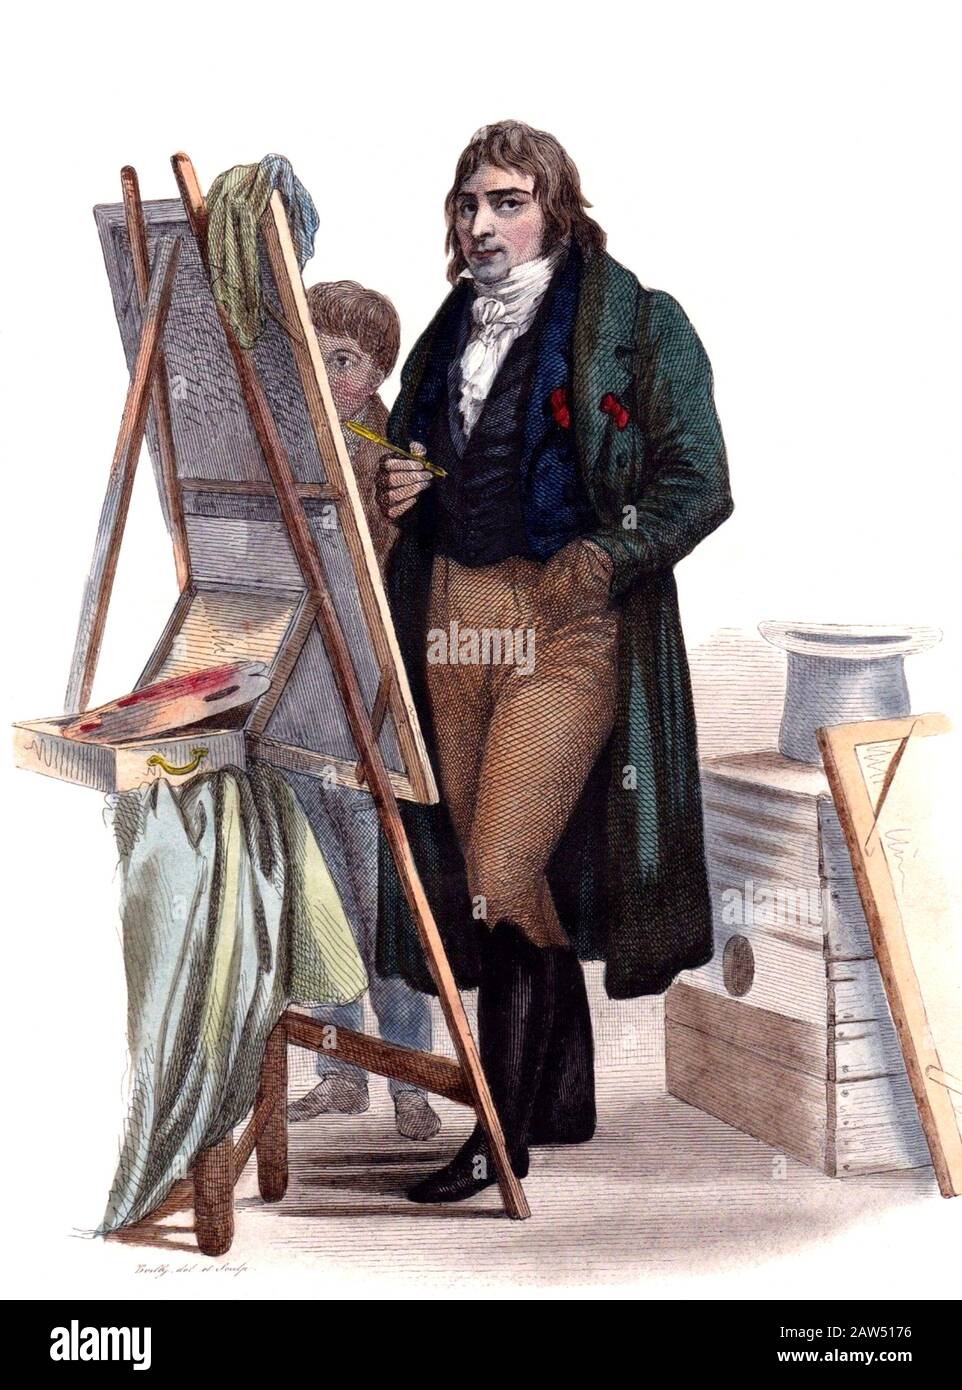 1810 ca , Paris , FRANCE : The french painter ANTOINE JEAN GROS baron GROS ( 1771 – 1835 ). His work was in the genres of history and Neoclassical pai Stock Photo